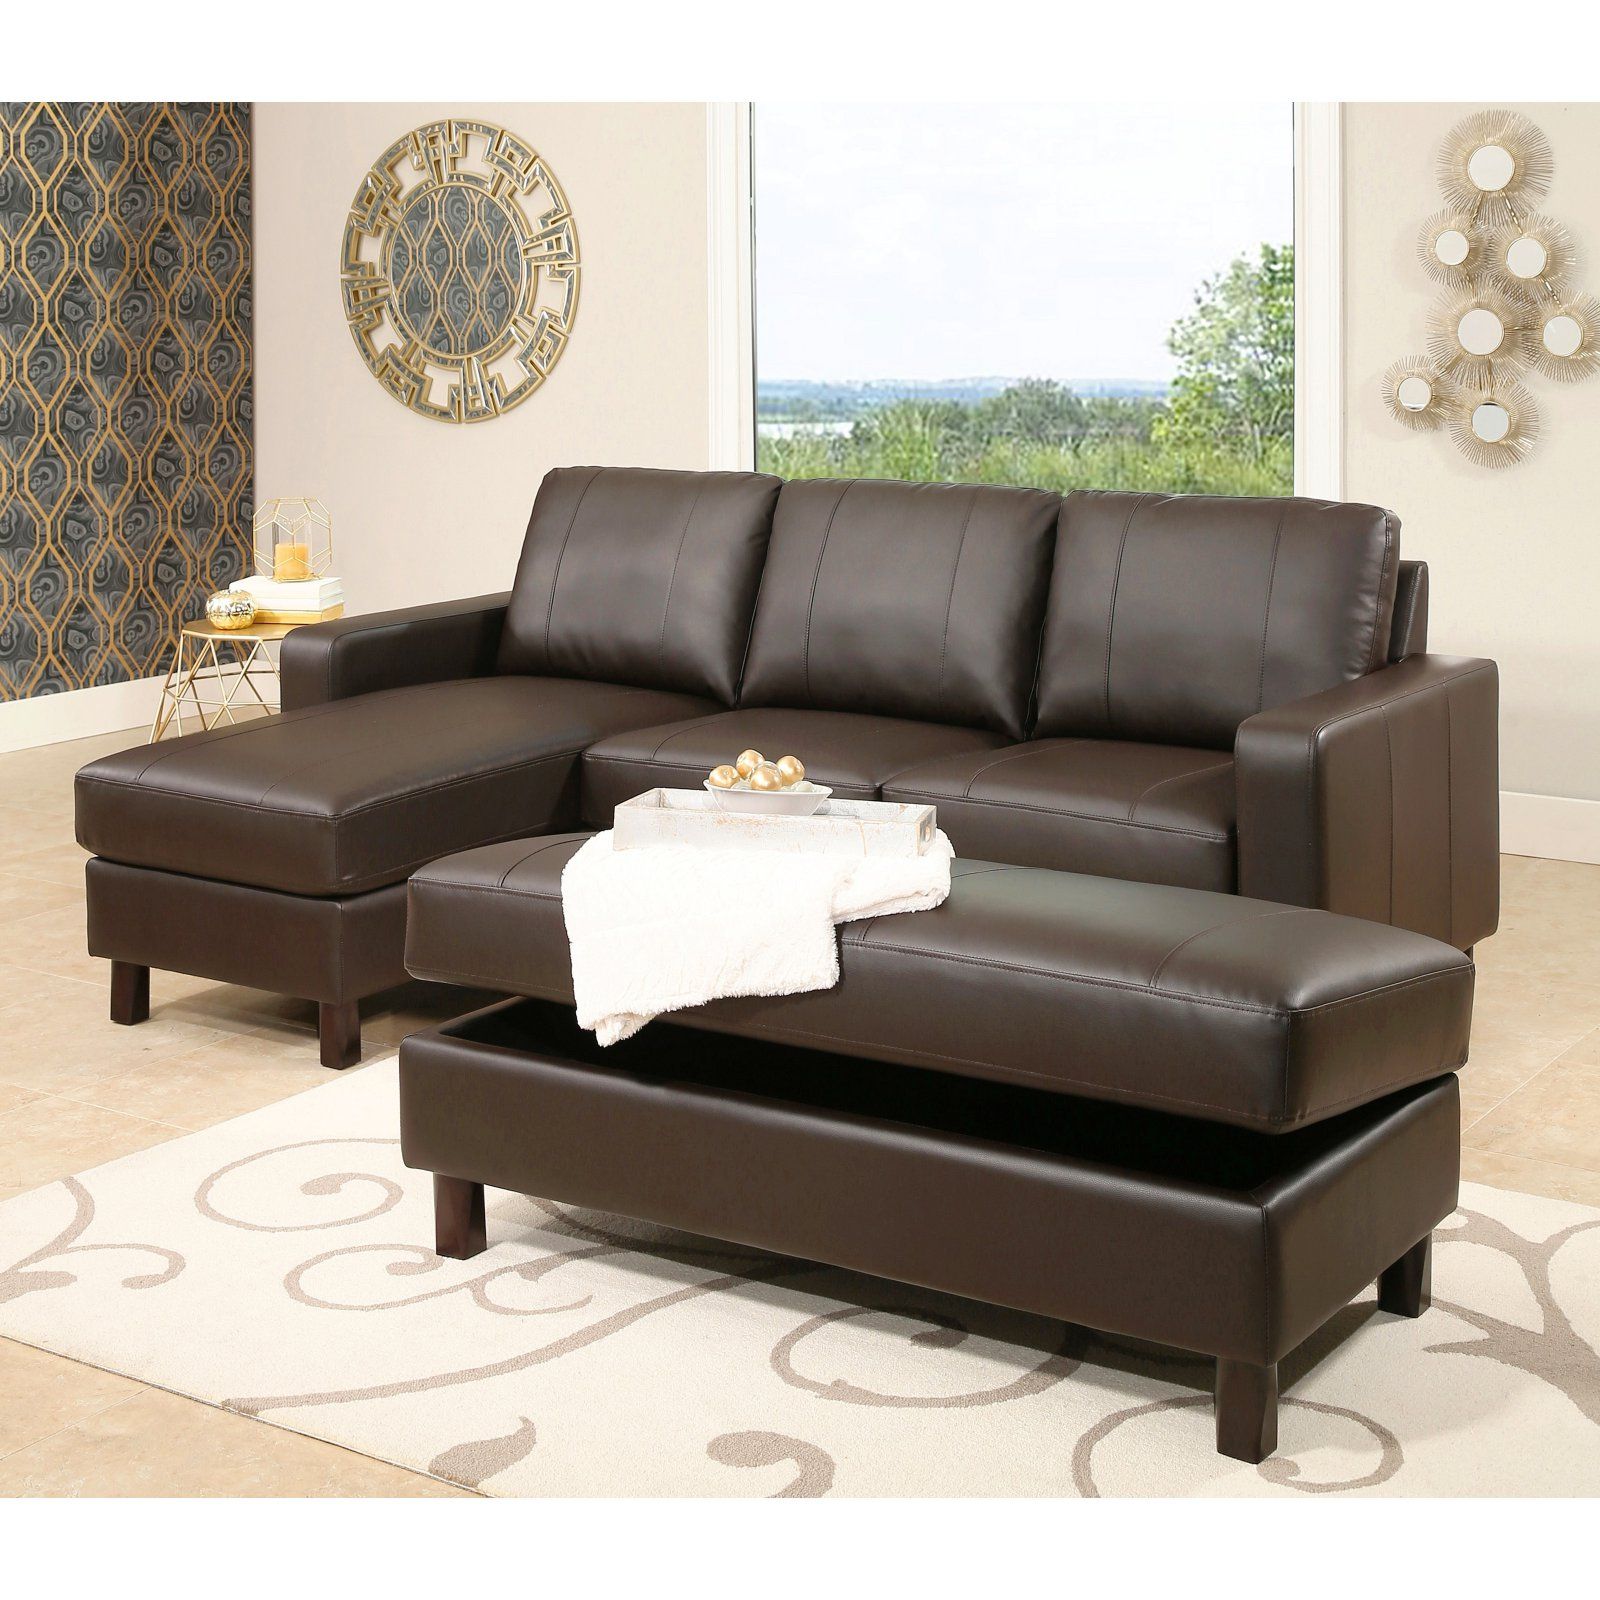 Abbyson Cedar Leather Reversible Sectional Sofa With With Copenhagen Reversible Small Space Sectional Sofas With Storage (View 10 of 15)